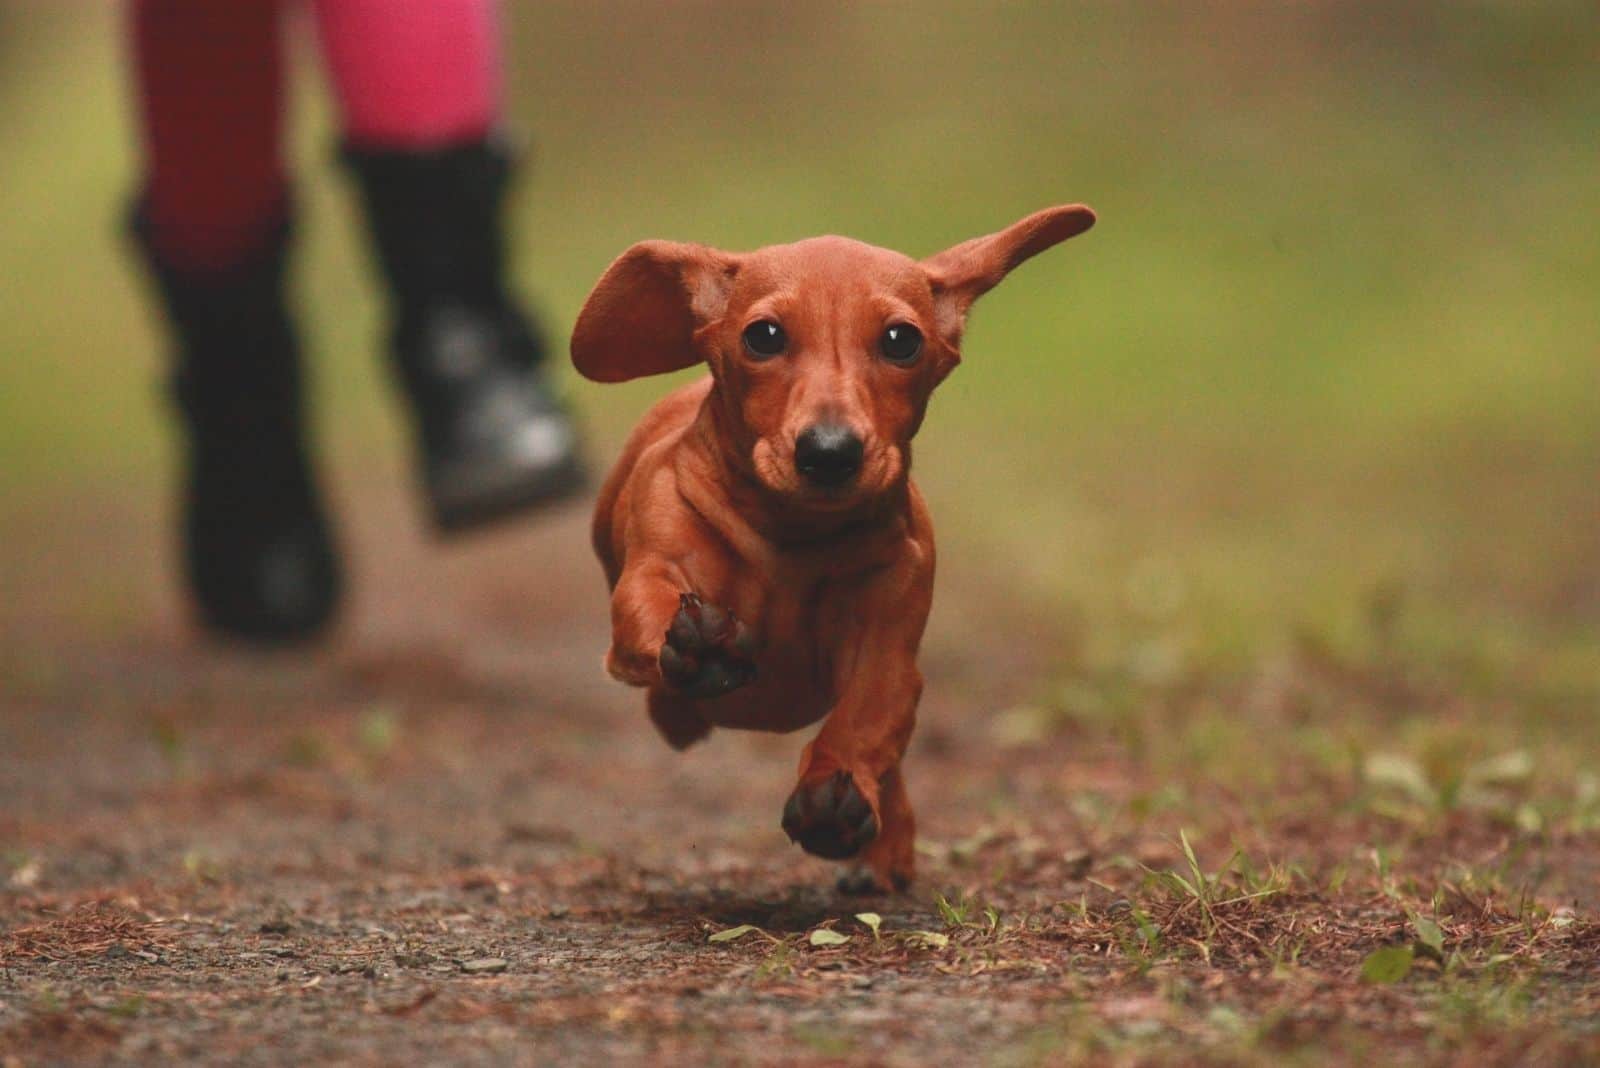 cute dachshund exercise and running outdoors